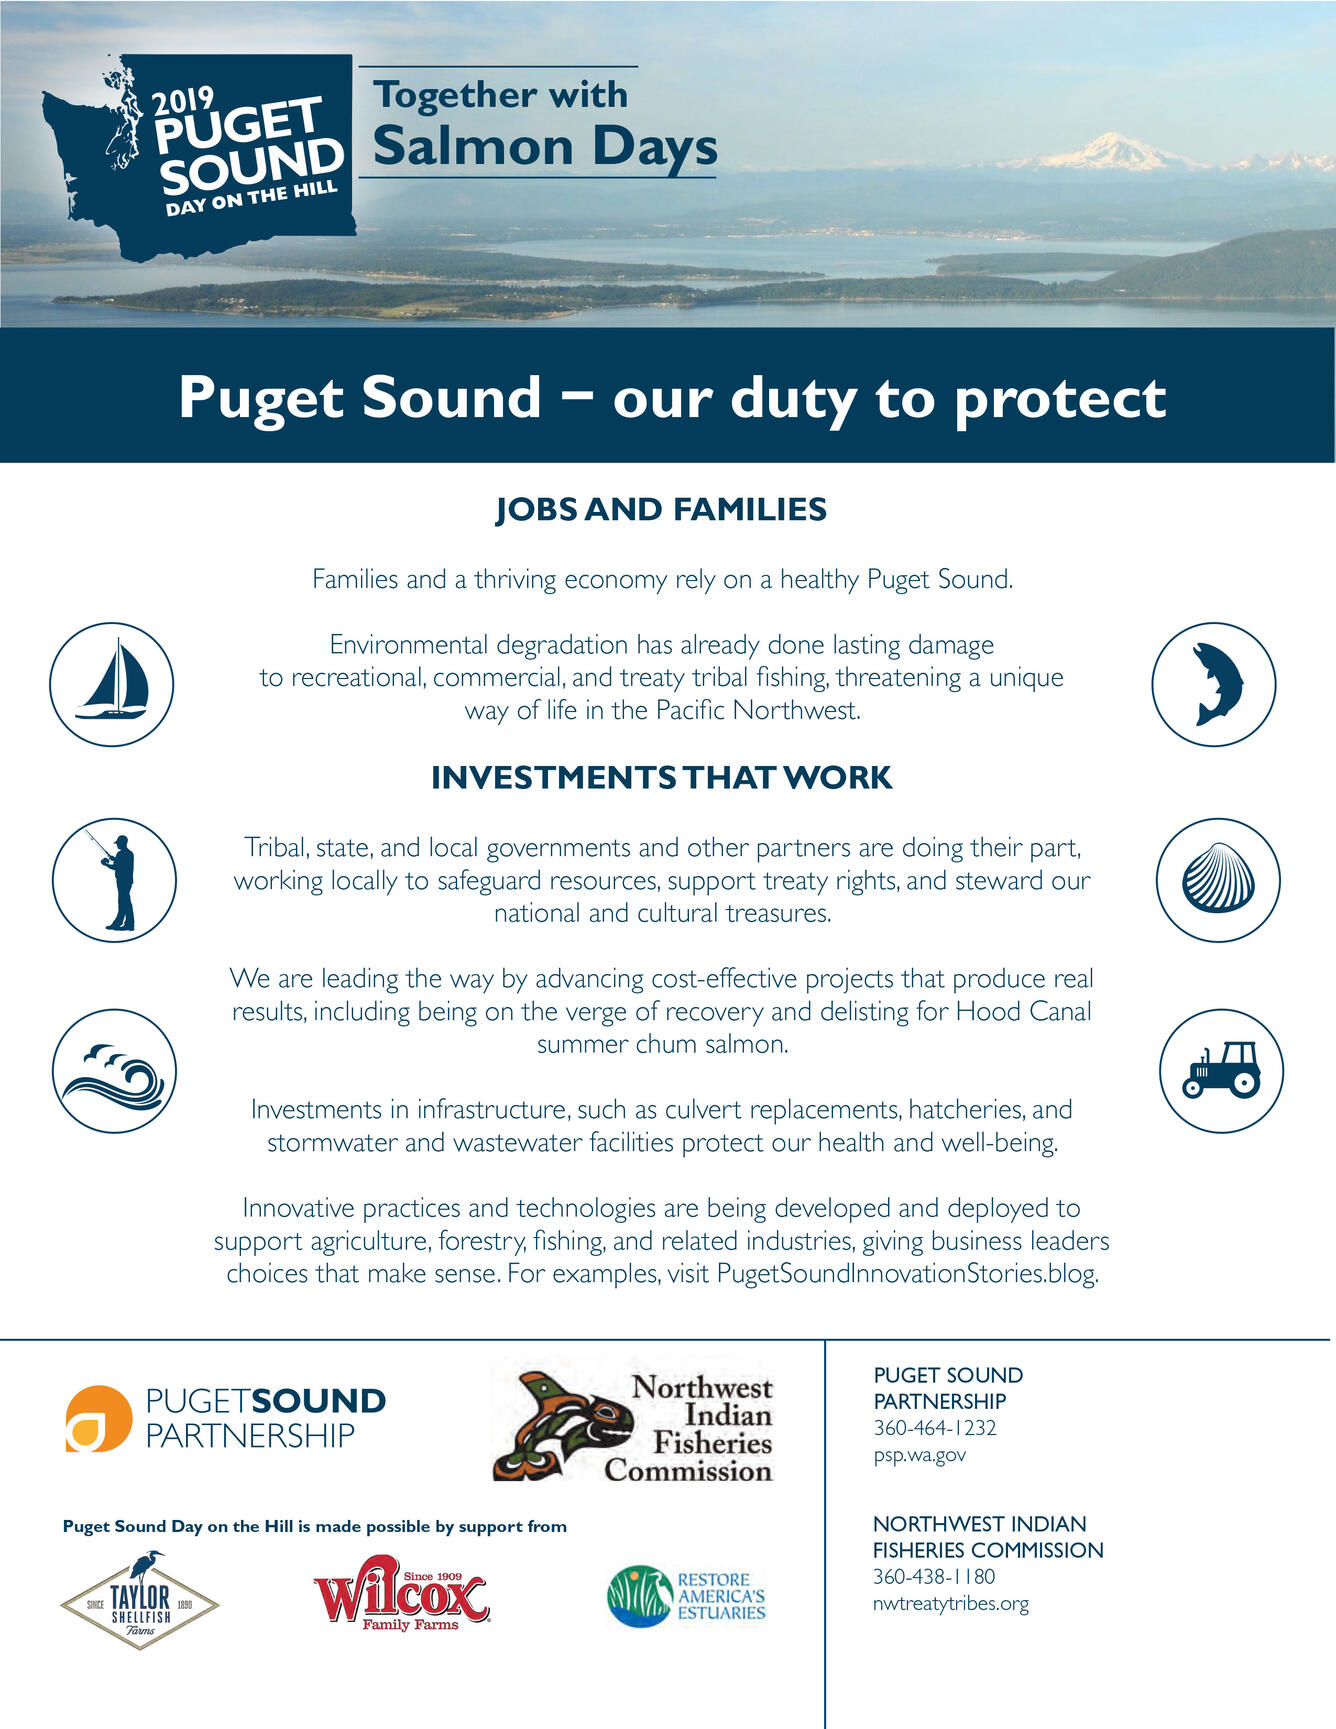 A page of text and images with a photo across the top, and other icons and text that describe the effort to protect Puget Sound.